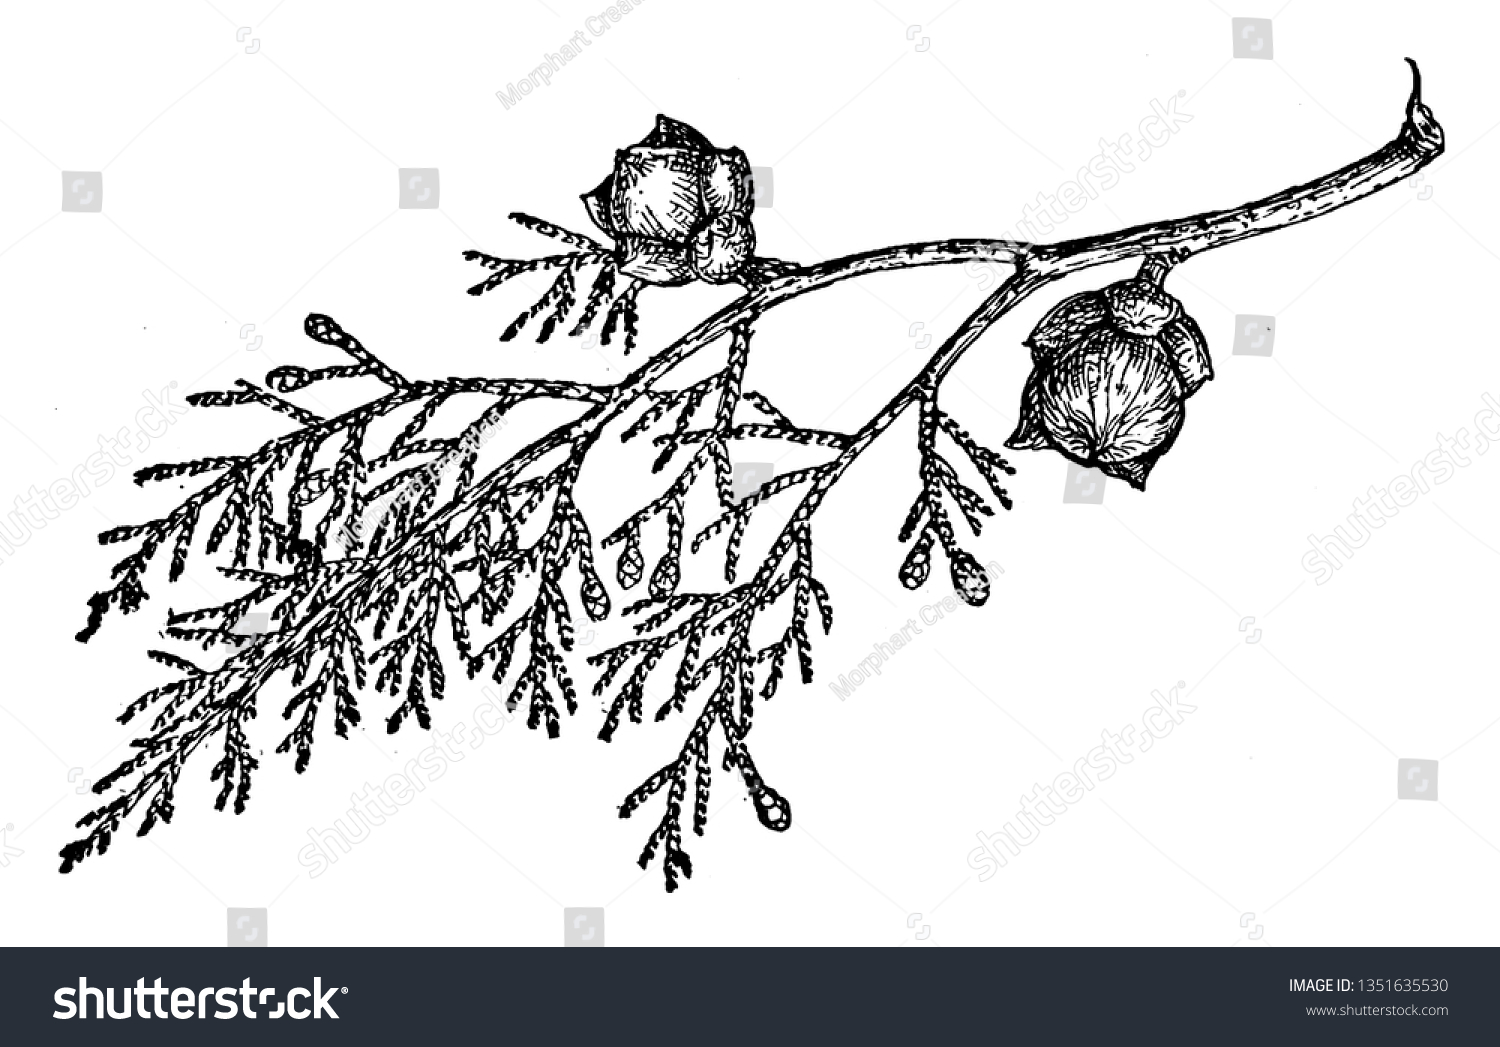 SVG of This picture showing branch of Shasta Cypress, the leaves are very scale and small, this is evergreen short tree, vintage line drawing or engraving illustration. svg